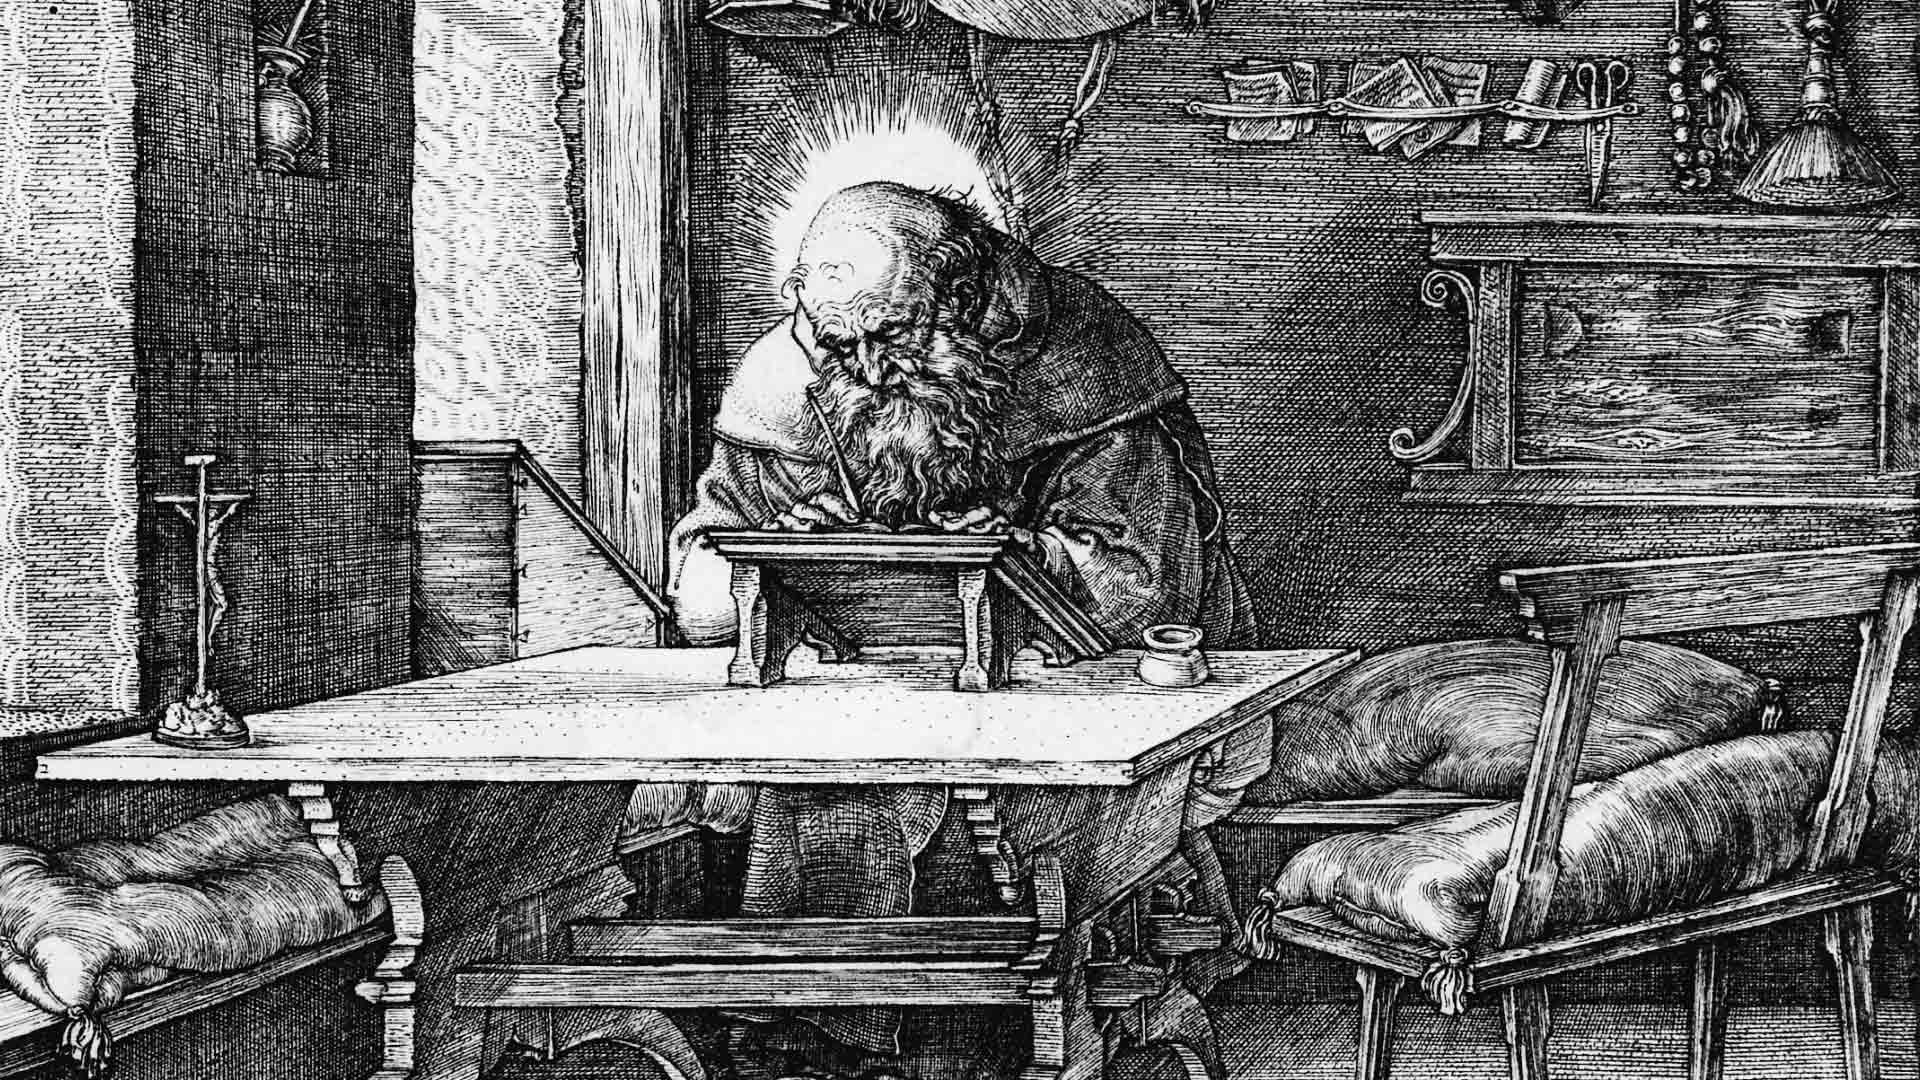 Saint Jerome n His Study, engraving detail, 1514, at the Metropolitan Museum of Art: https://www.metmuseum.org/art/collection/search/336229 (CC0 1.0)